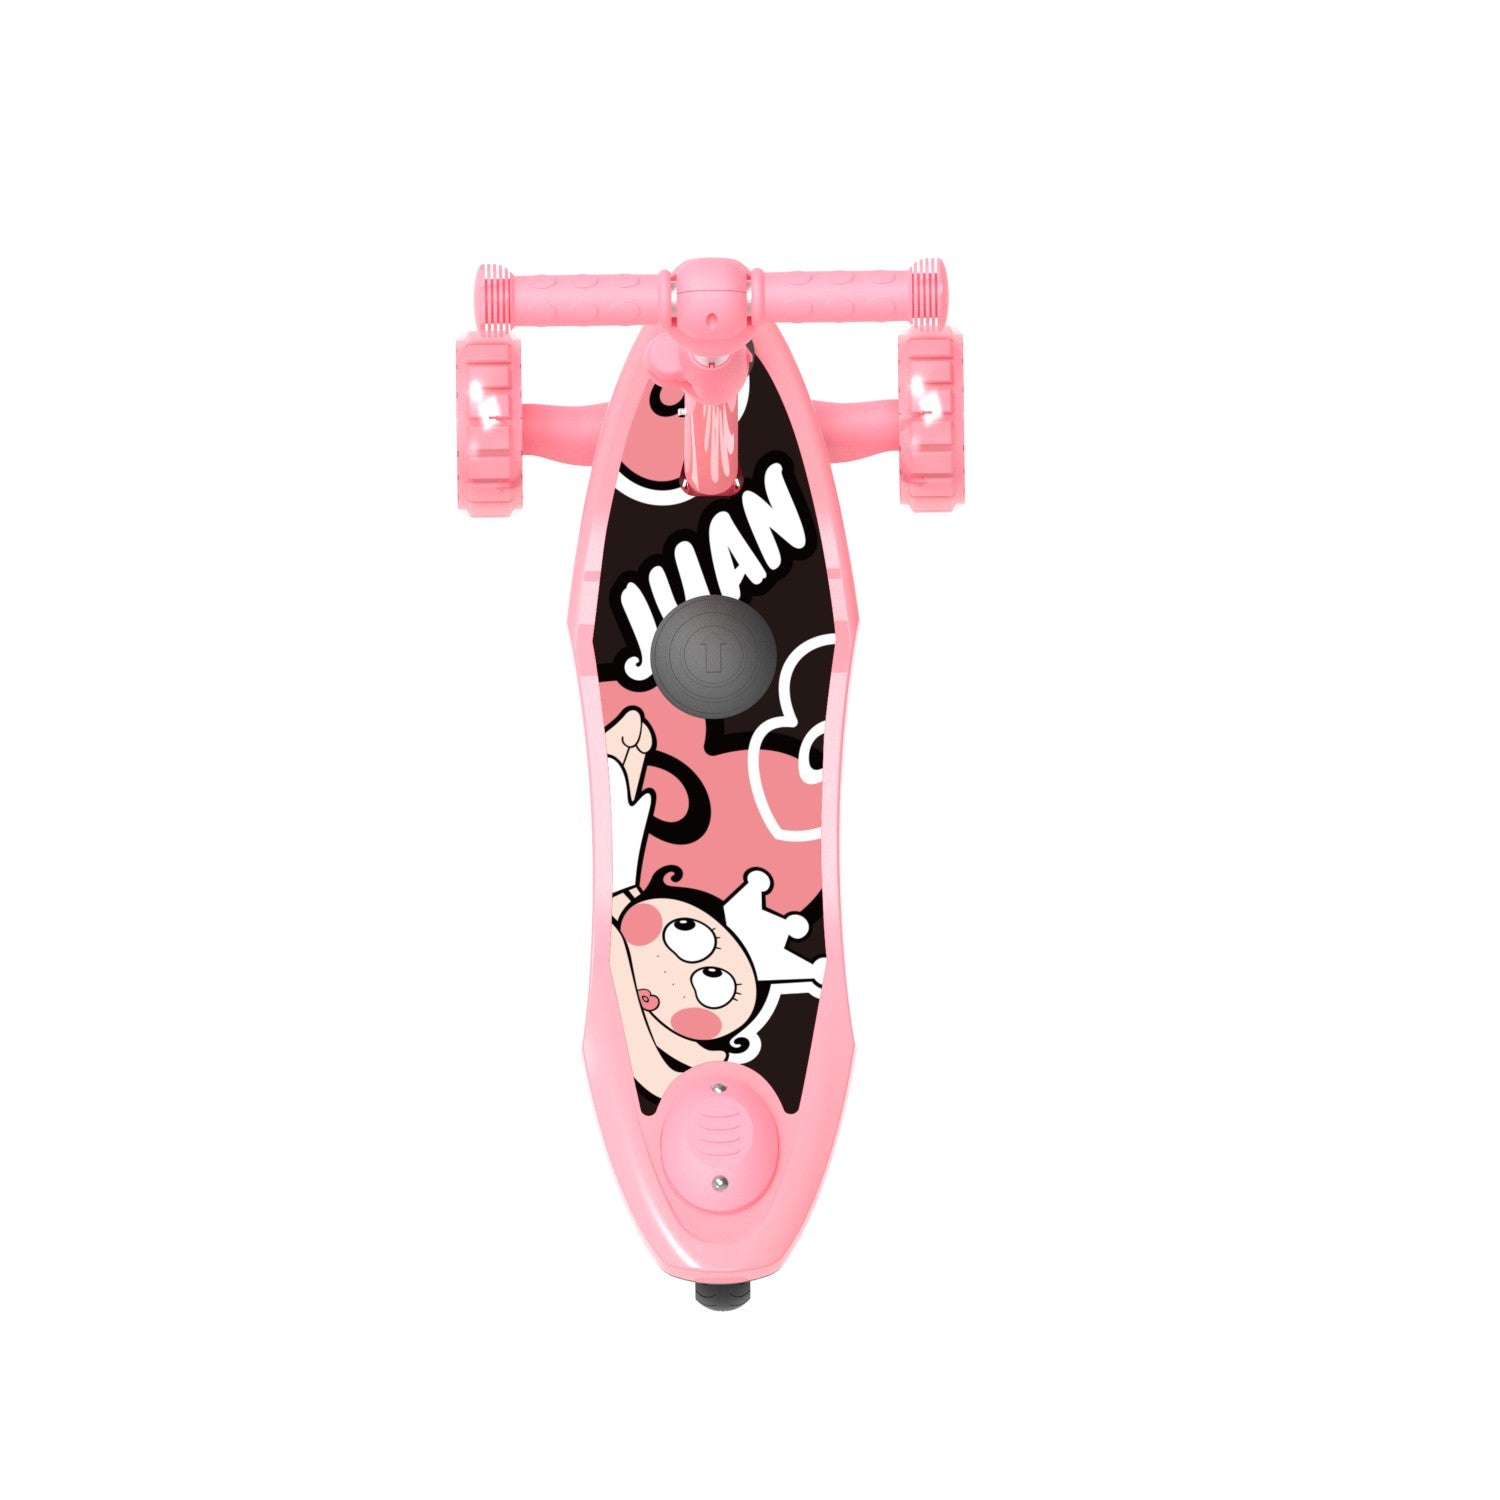 iSinwheel® 2in1 Electric Scooter for Kids Pink pedal illustration